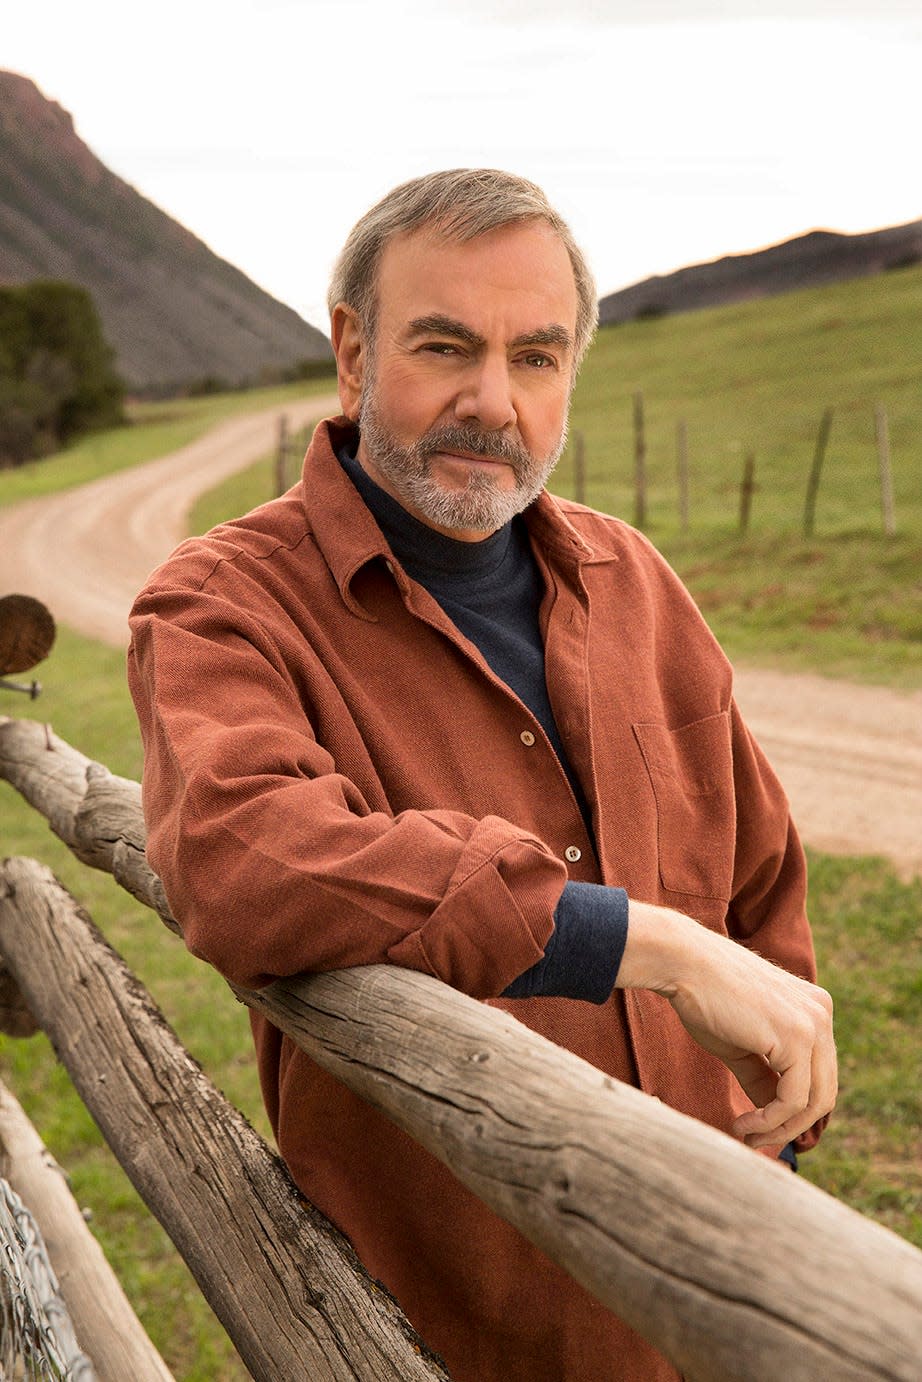 A new musical titled "A Beautiful Noise," about the life and career of singer Neil Diamond will premiere in Boston in June 2022.